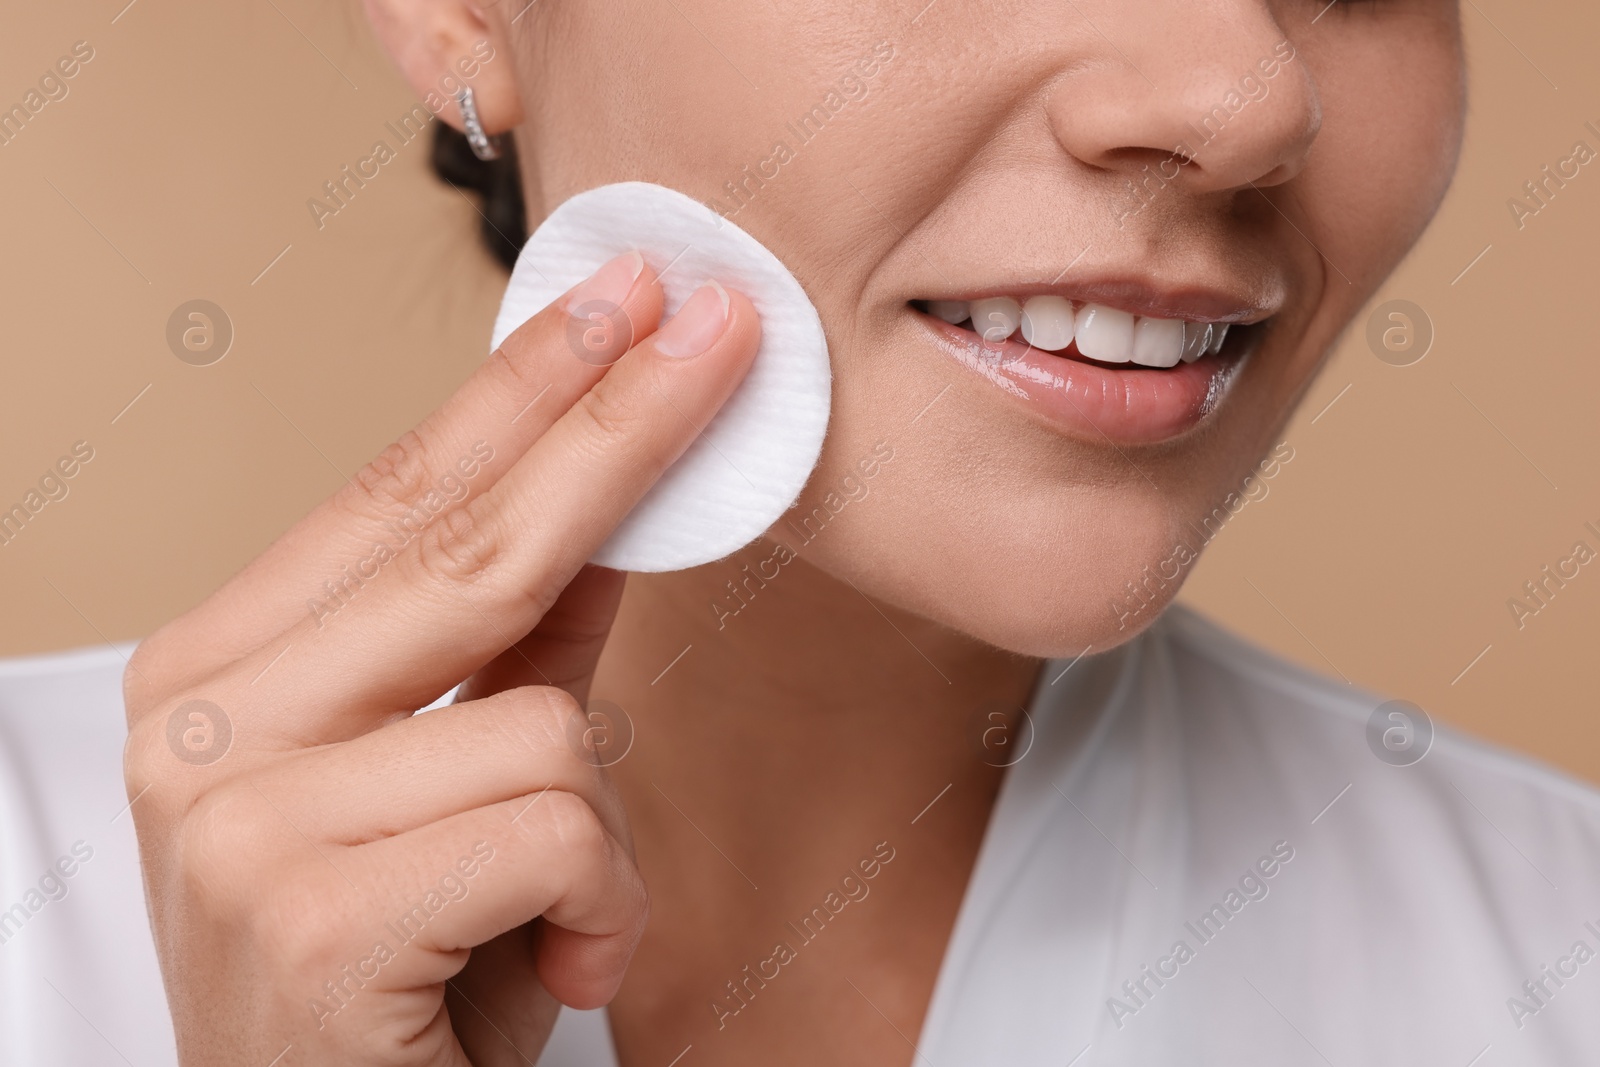 Photo of Young woman cleaning her face with cotton pad on beige background, closeup